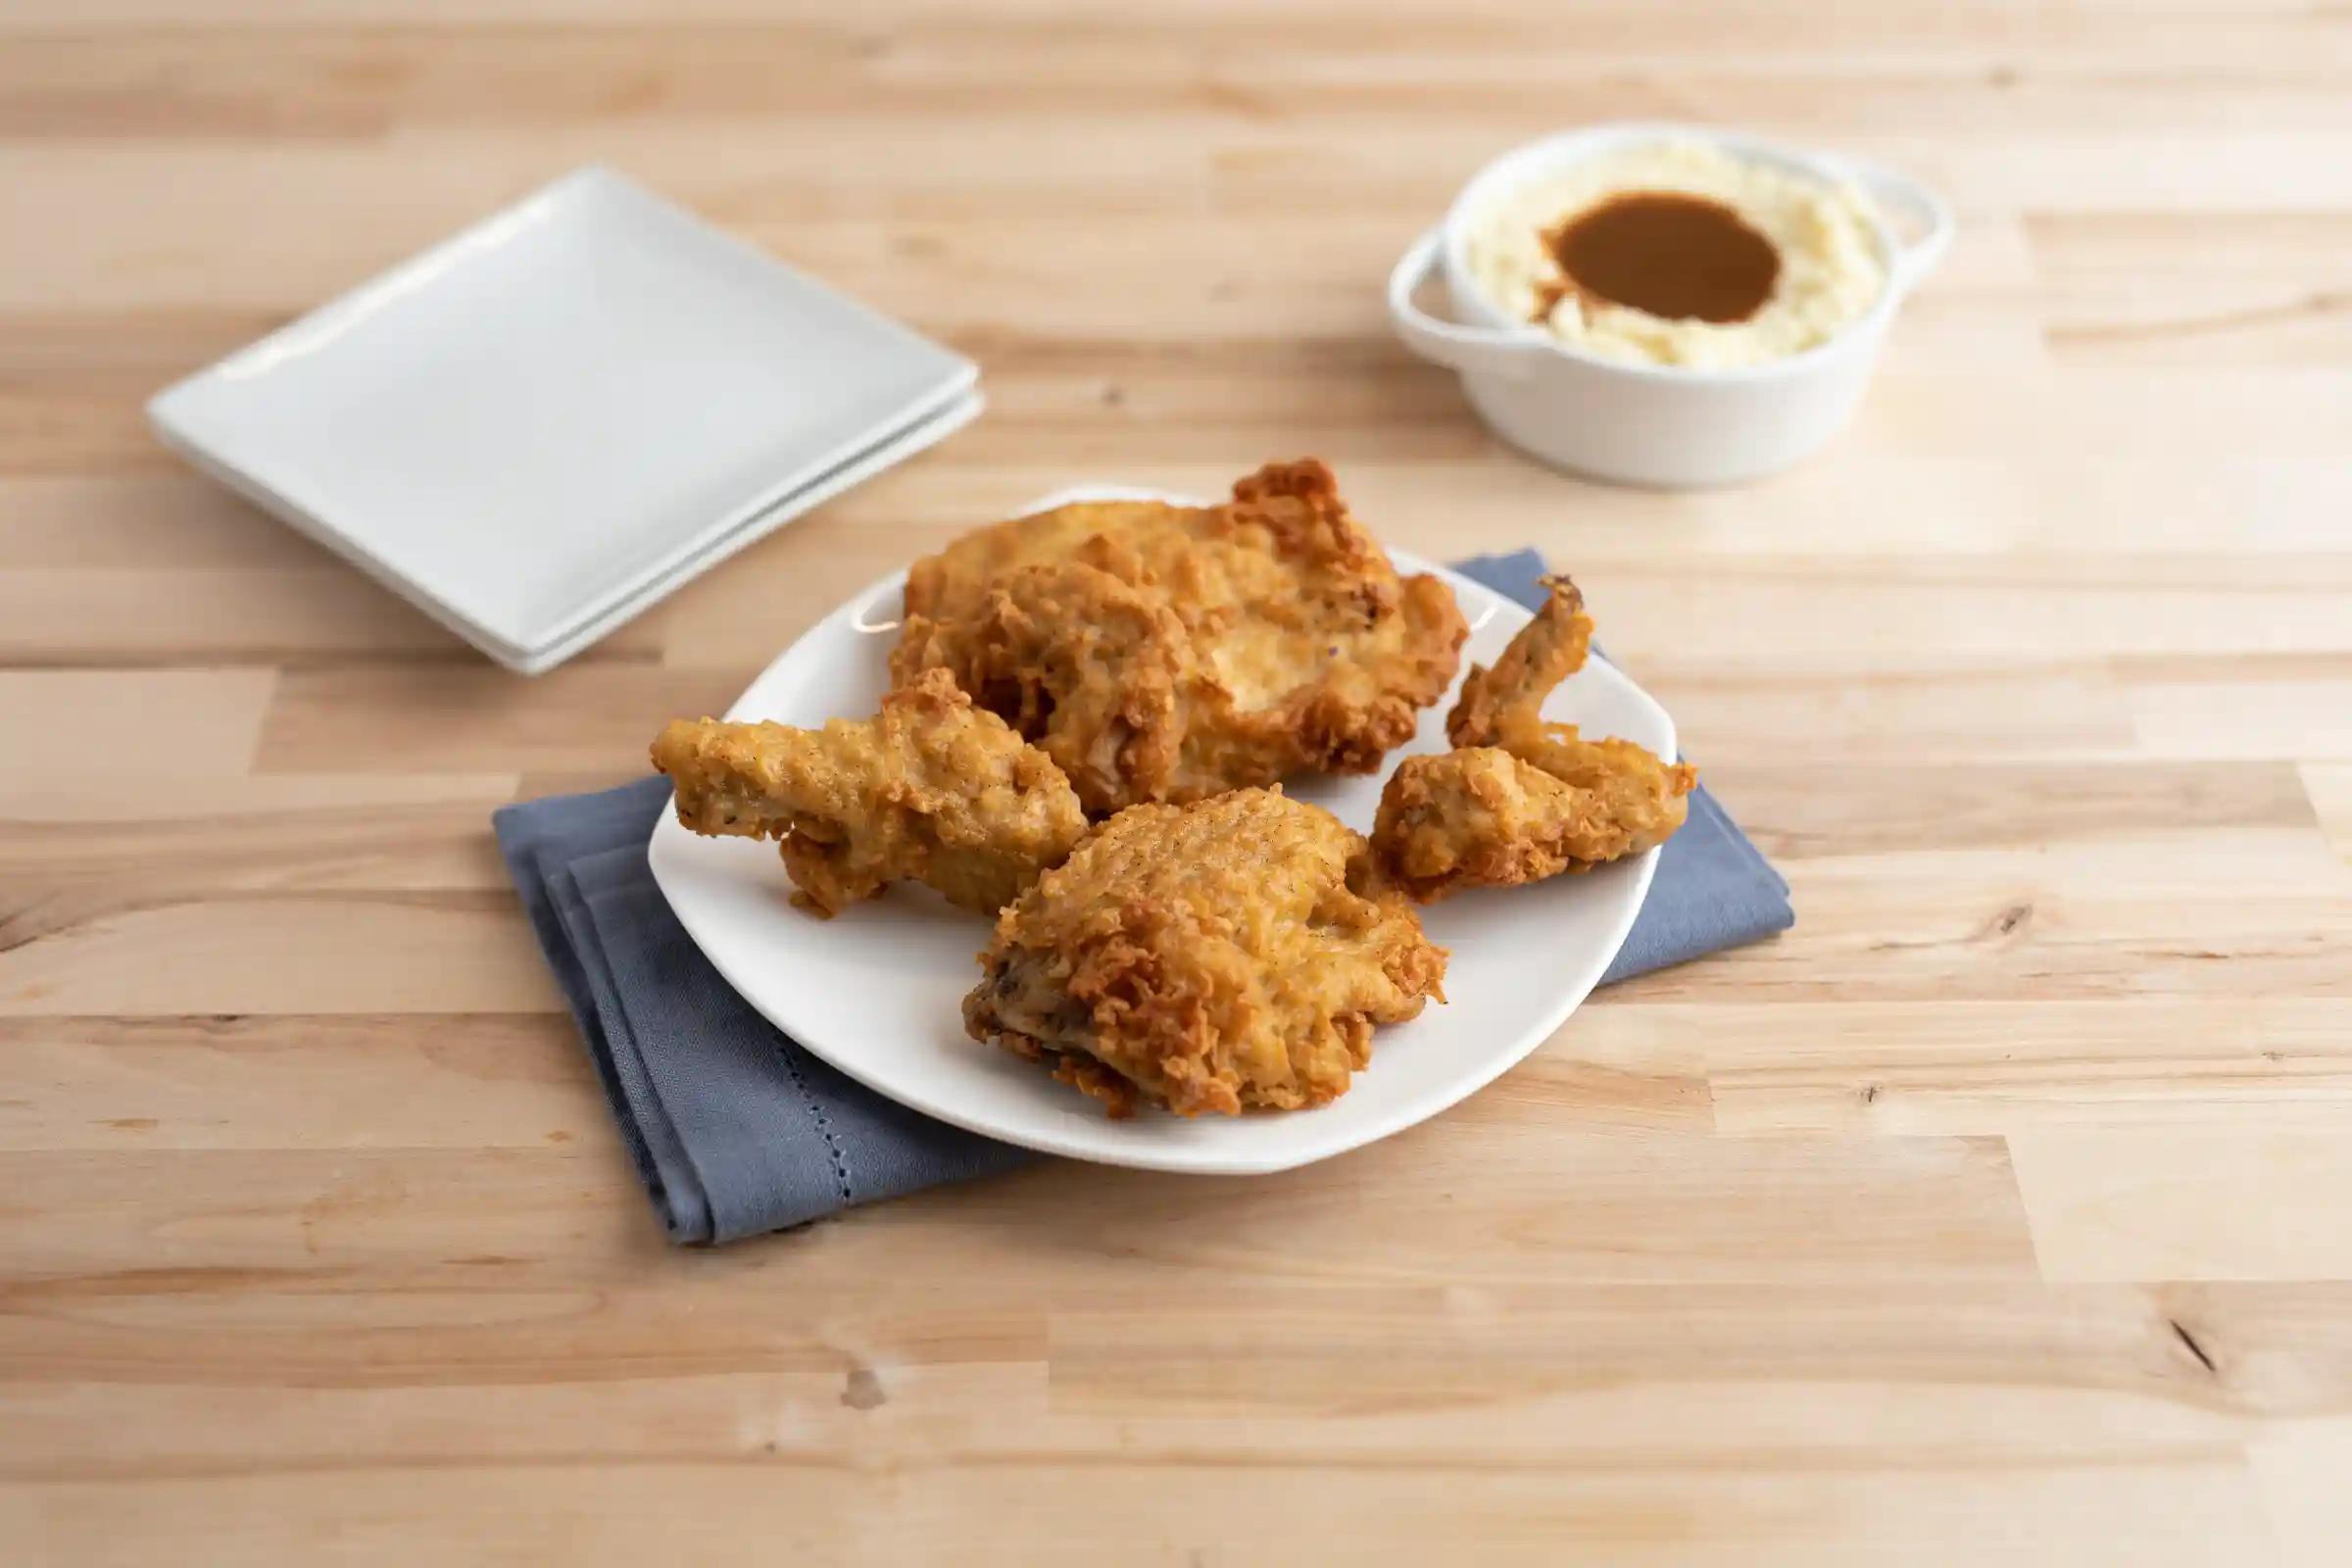 Tyson® Honey Stung® Fully Cooked Breaded 8 Piece Cut Chicken_image_01